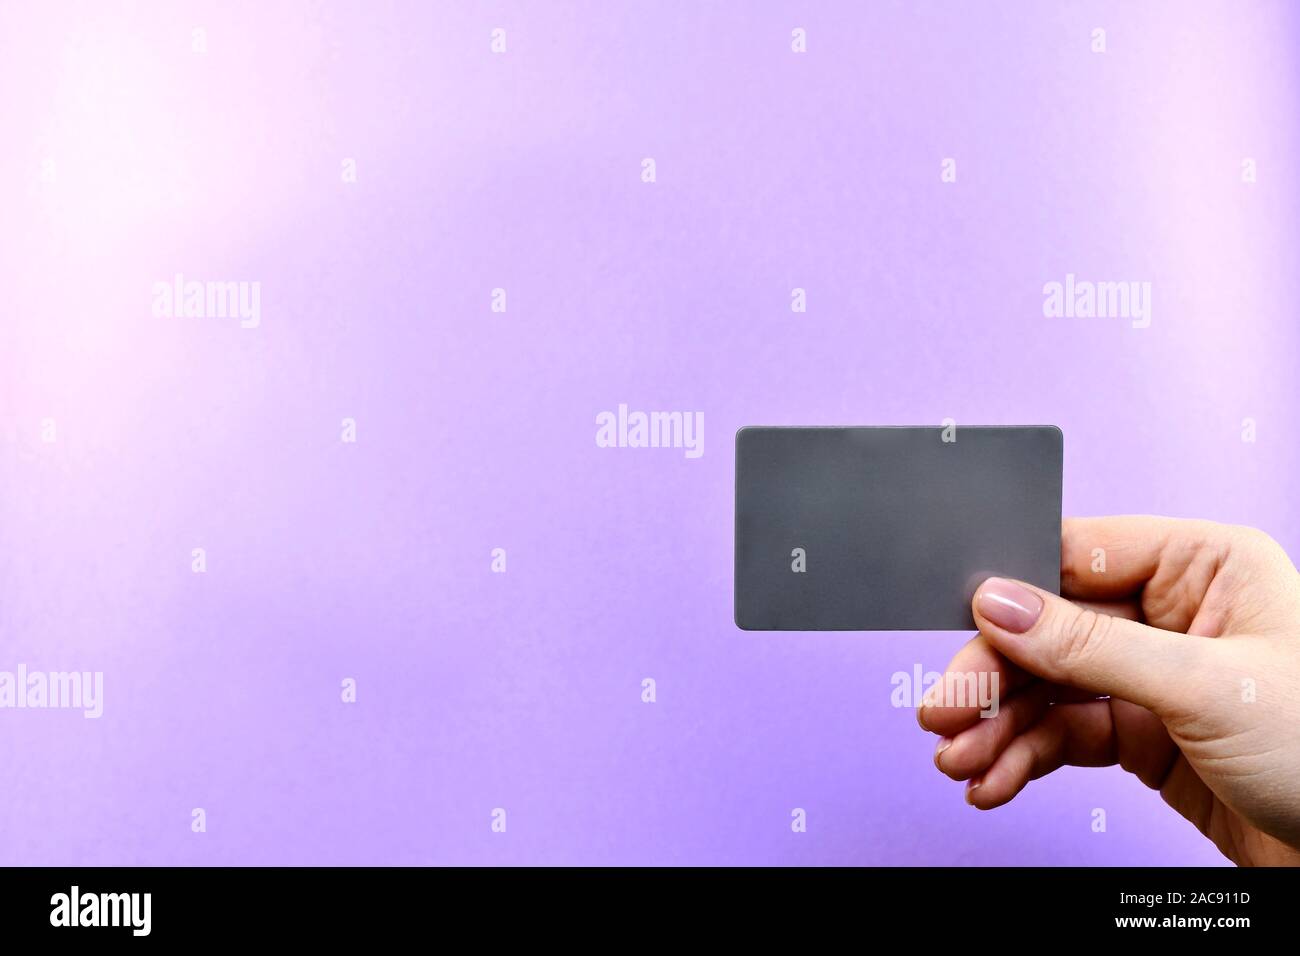 Demonstration of a gray card in a hand on a purple background. Stock Photo